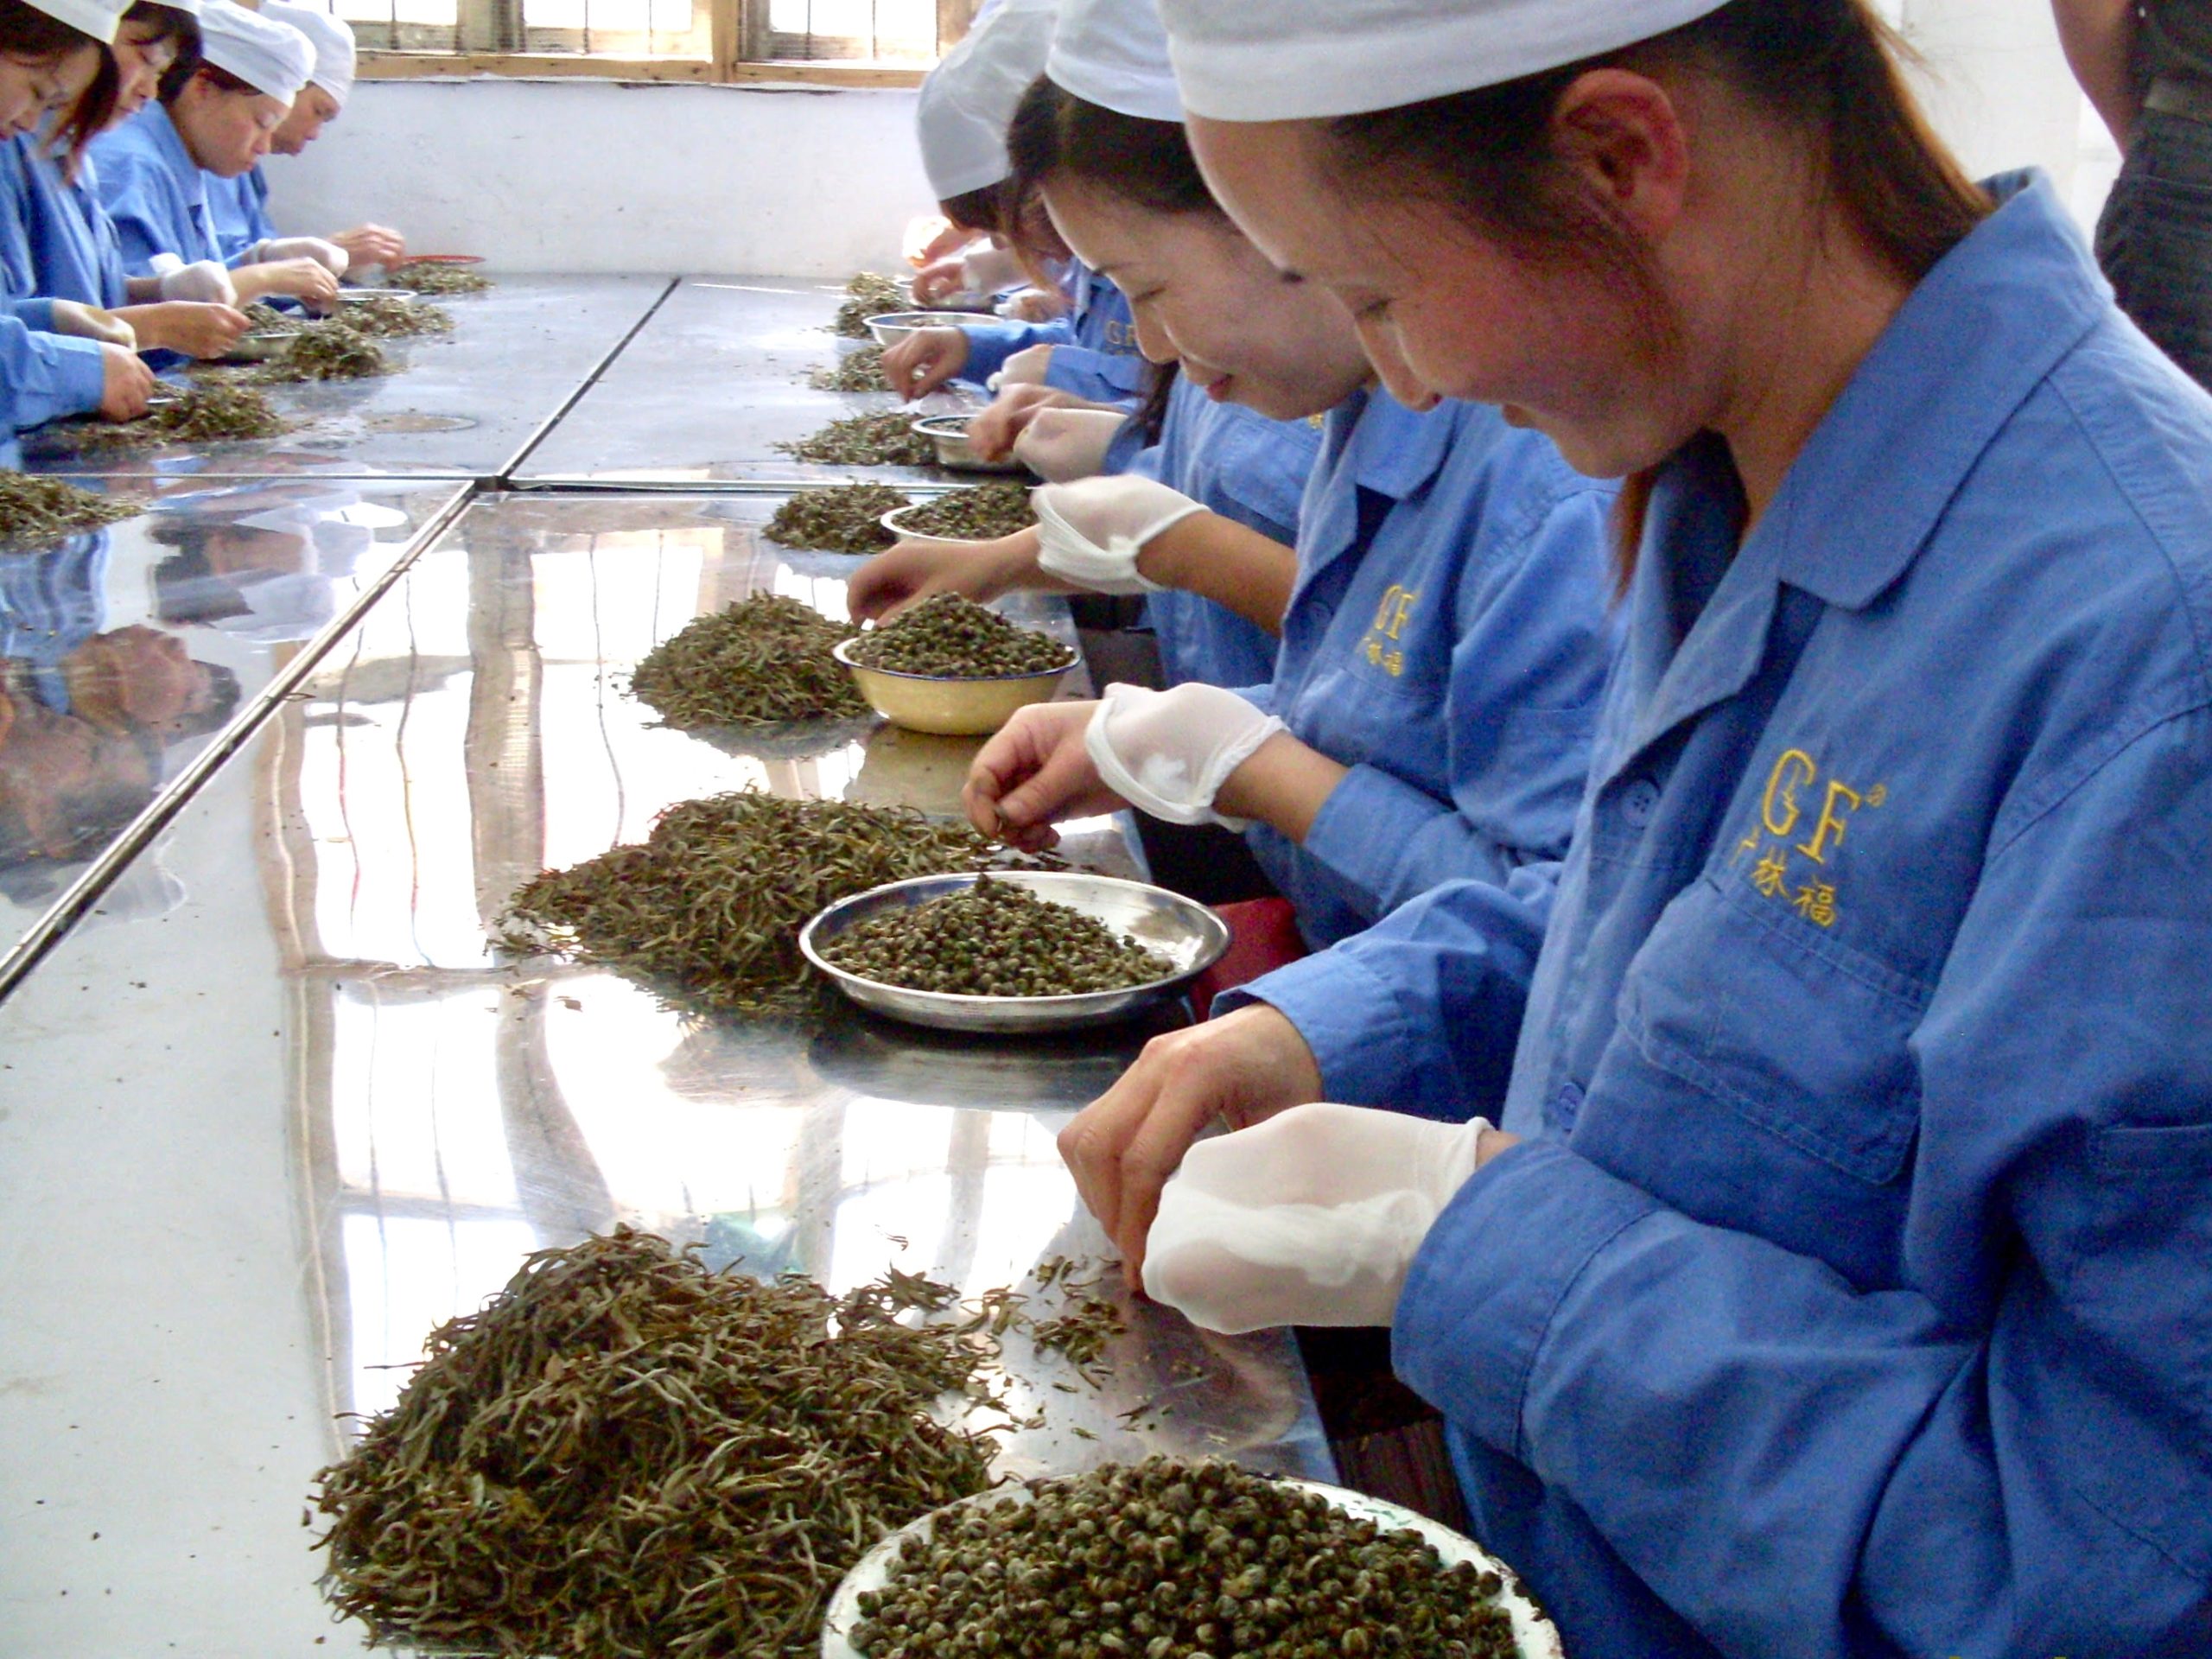 A row of people in smocks at a table, each with a pile of unrolled tea leaves and a bowl to fill with hand-rolled pearls.